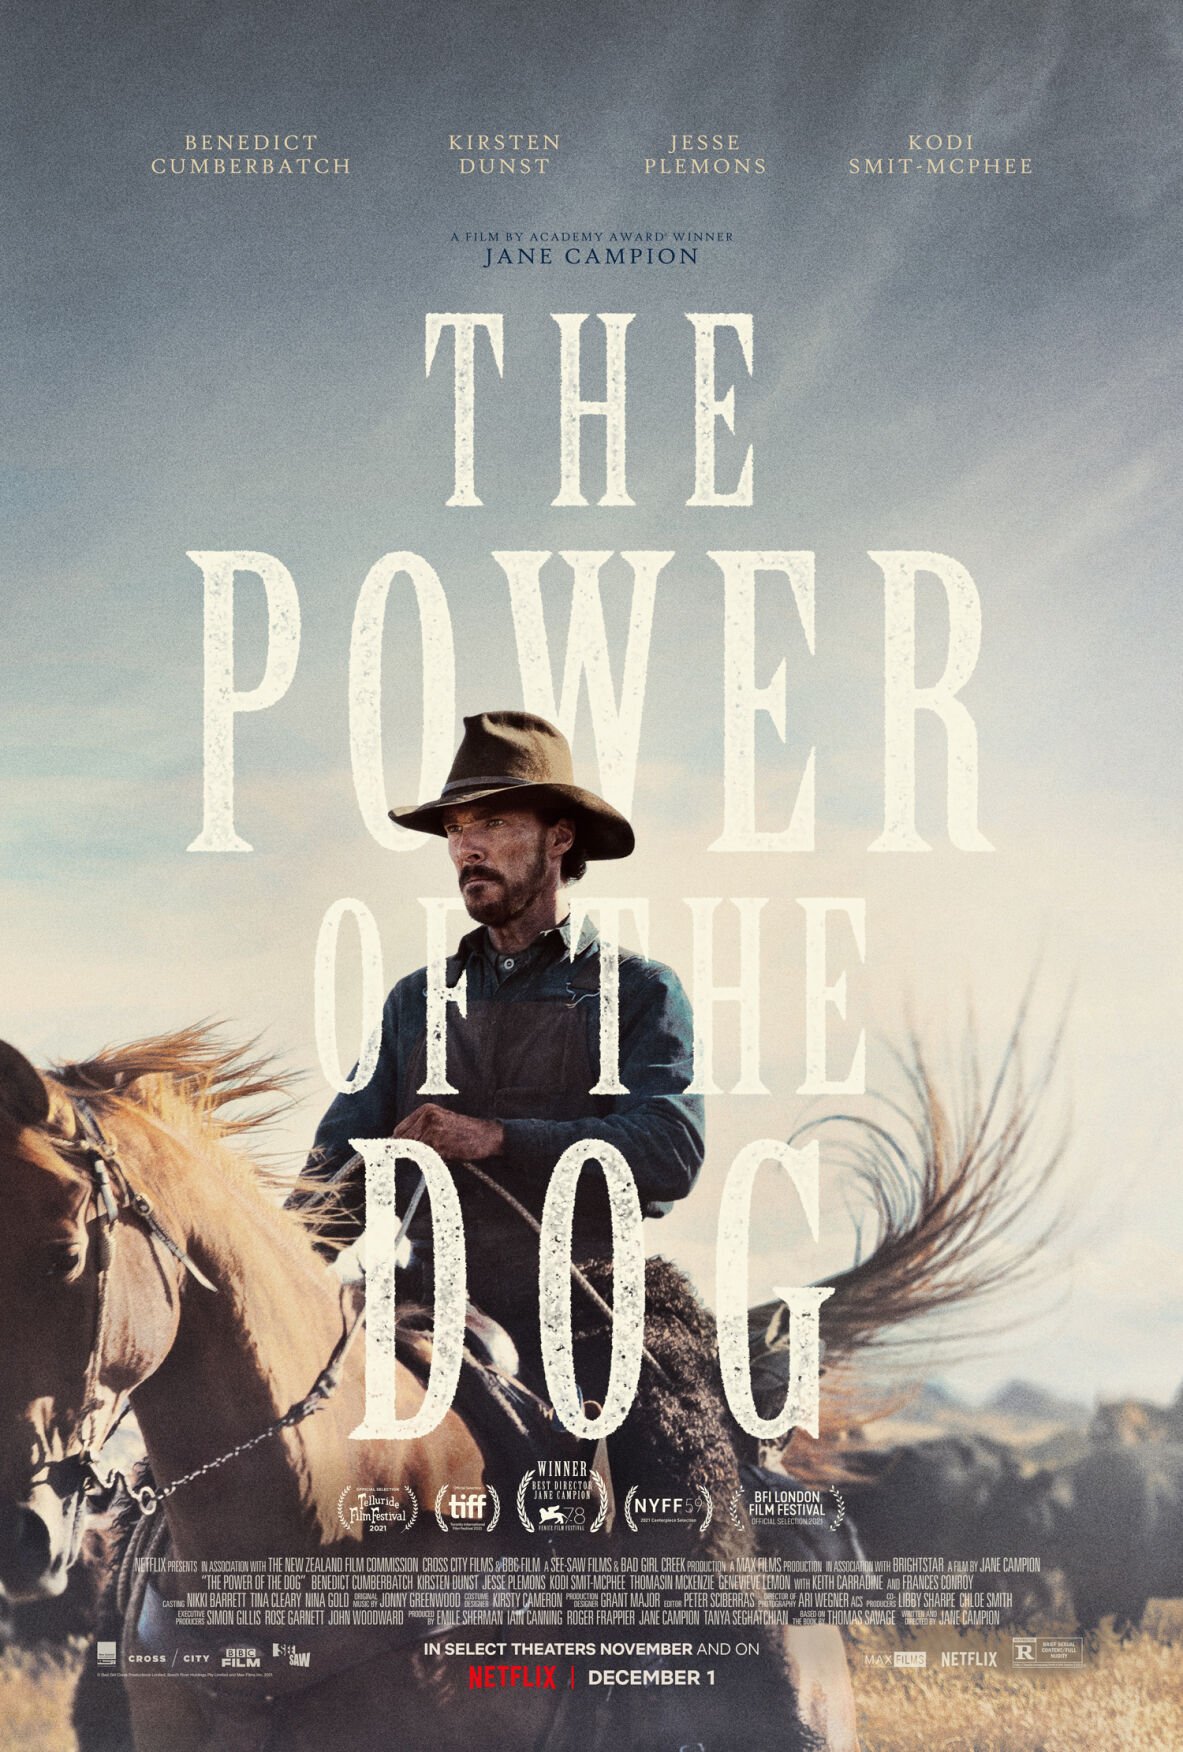 'The Power of the Dog' poster